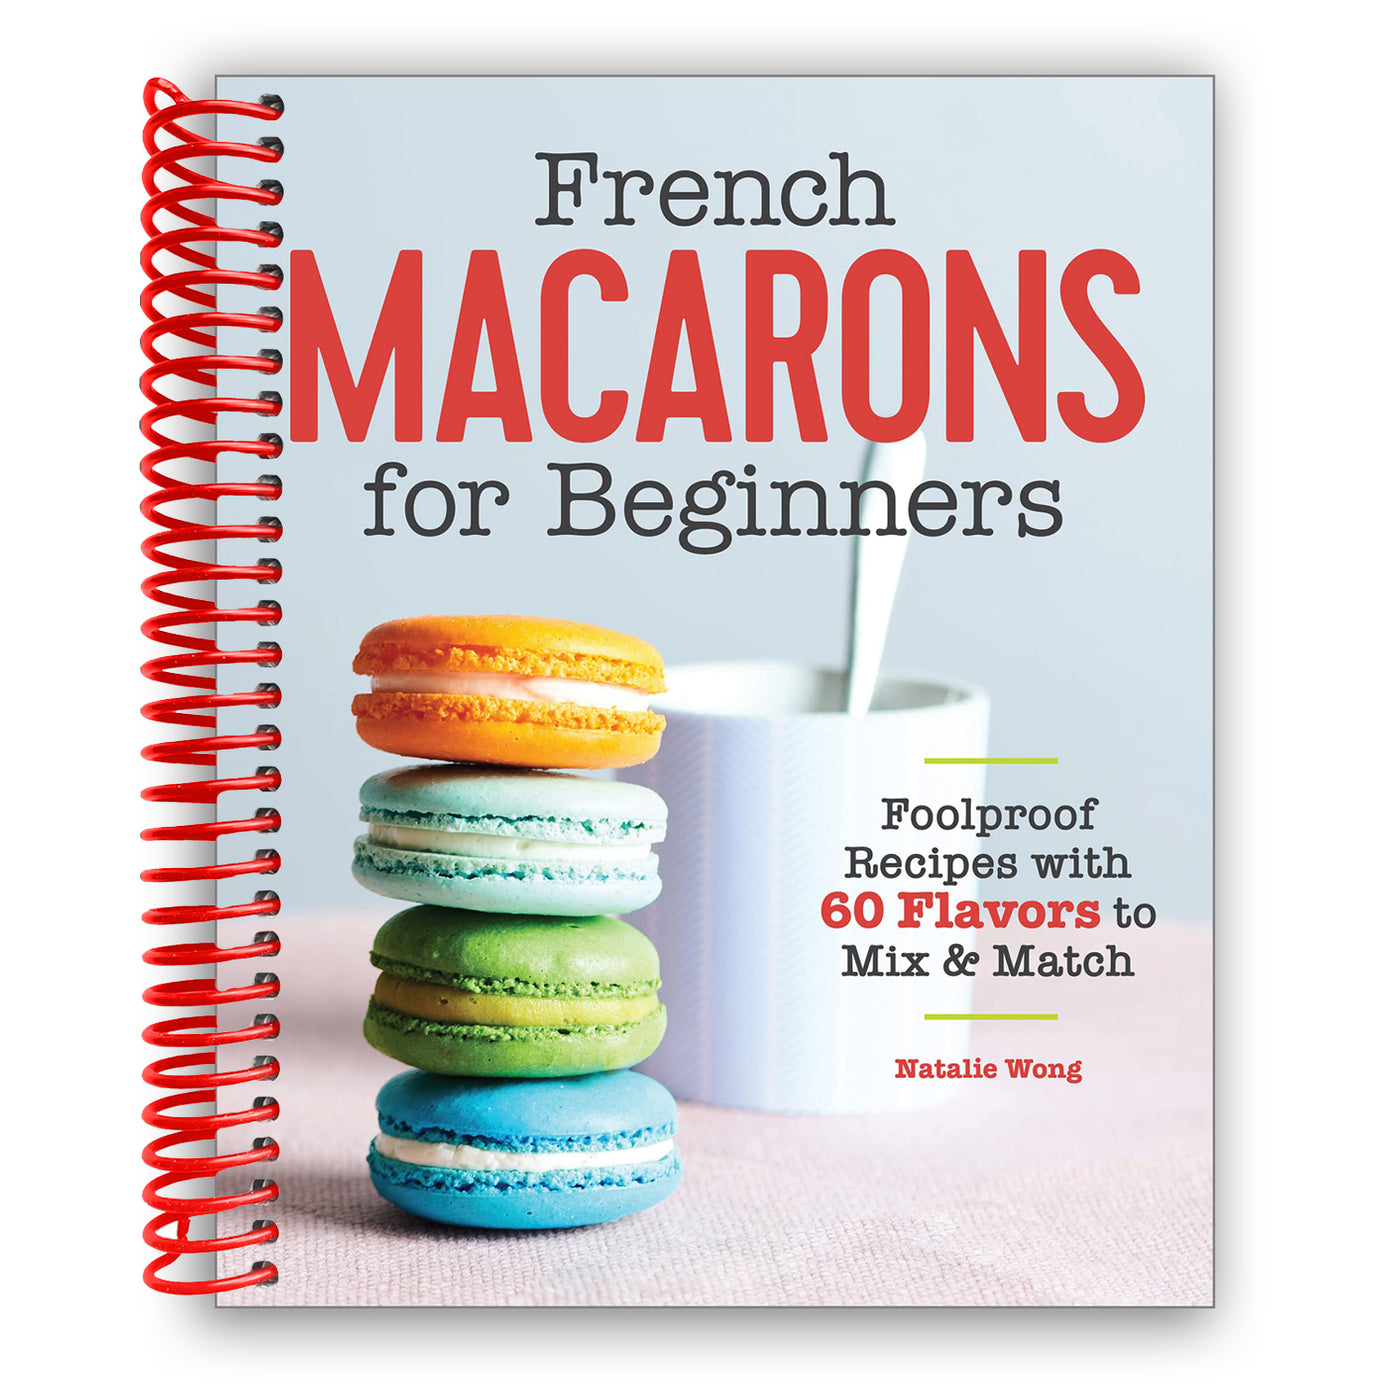 French Macarons for Beginners: Foolproof Recipes with 60 Flavors to Mix and Match (Spiral Bound)